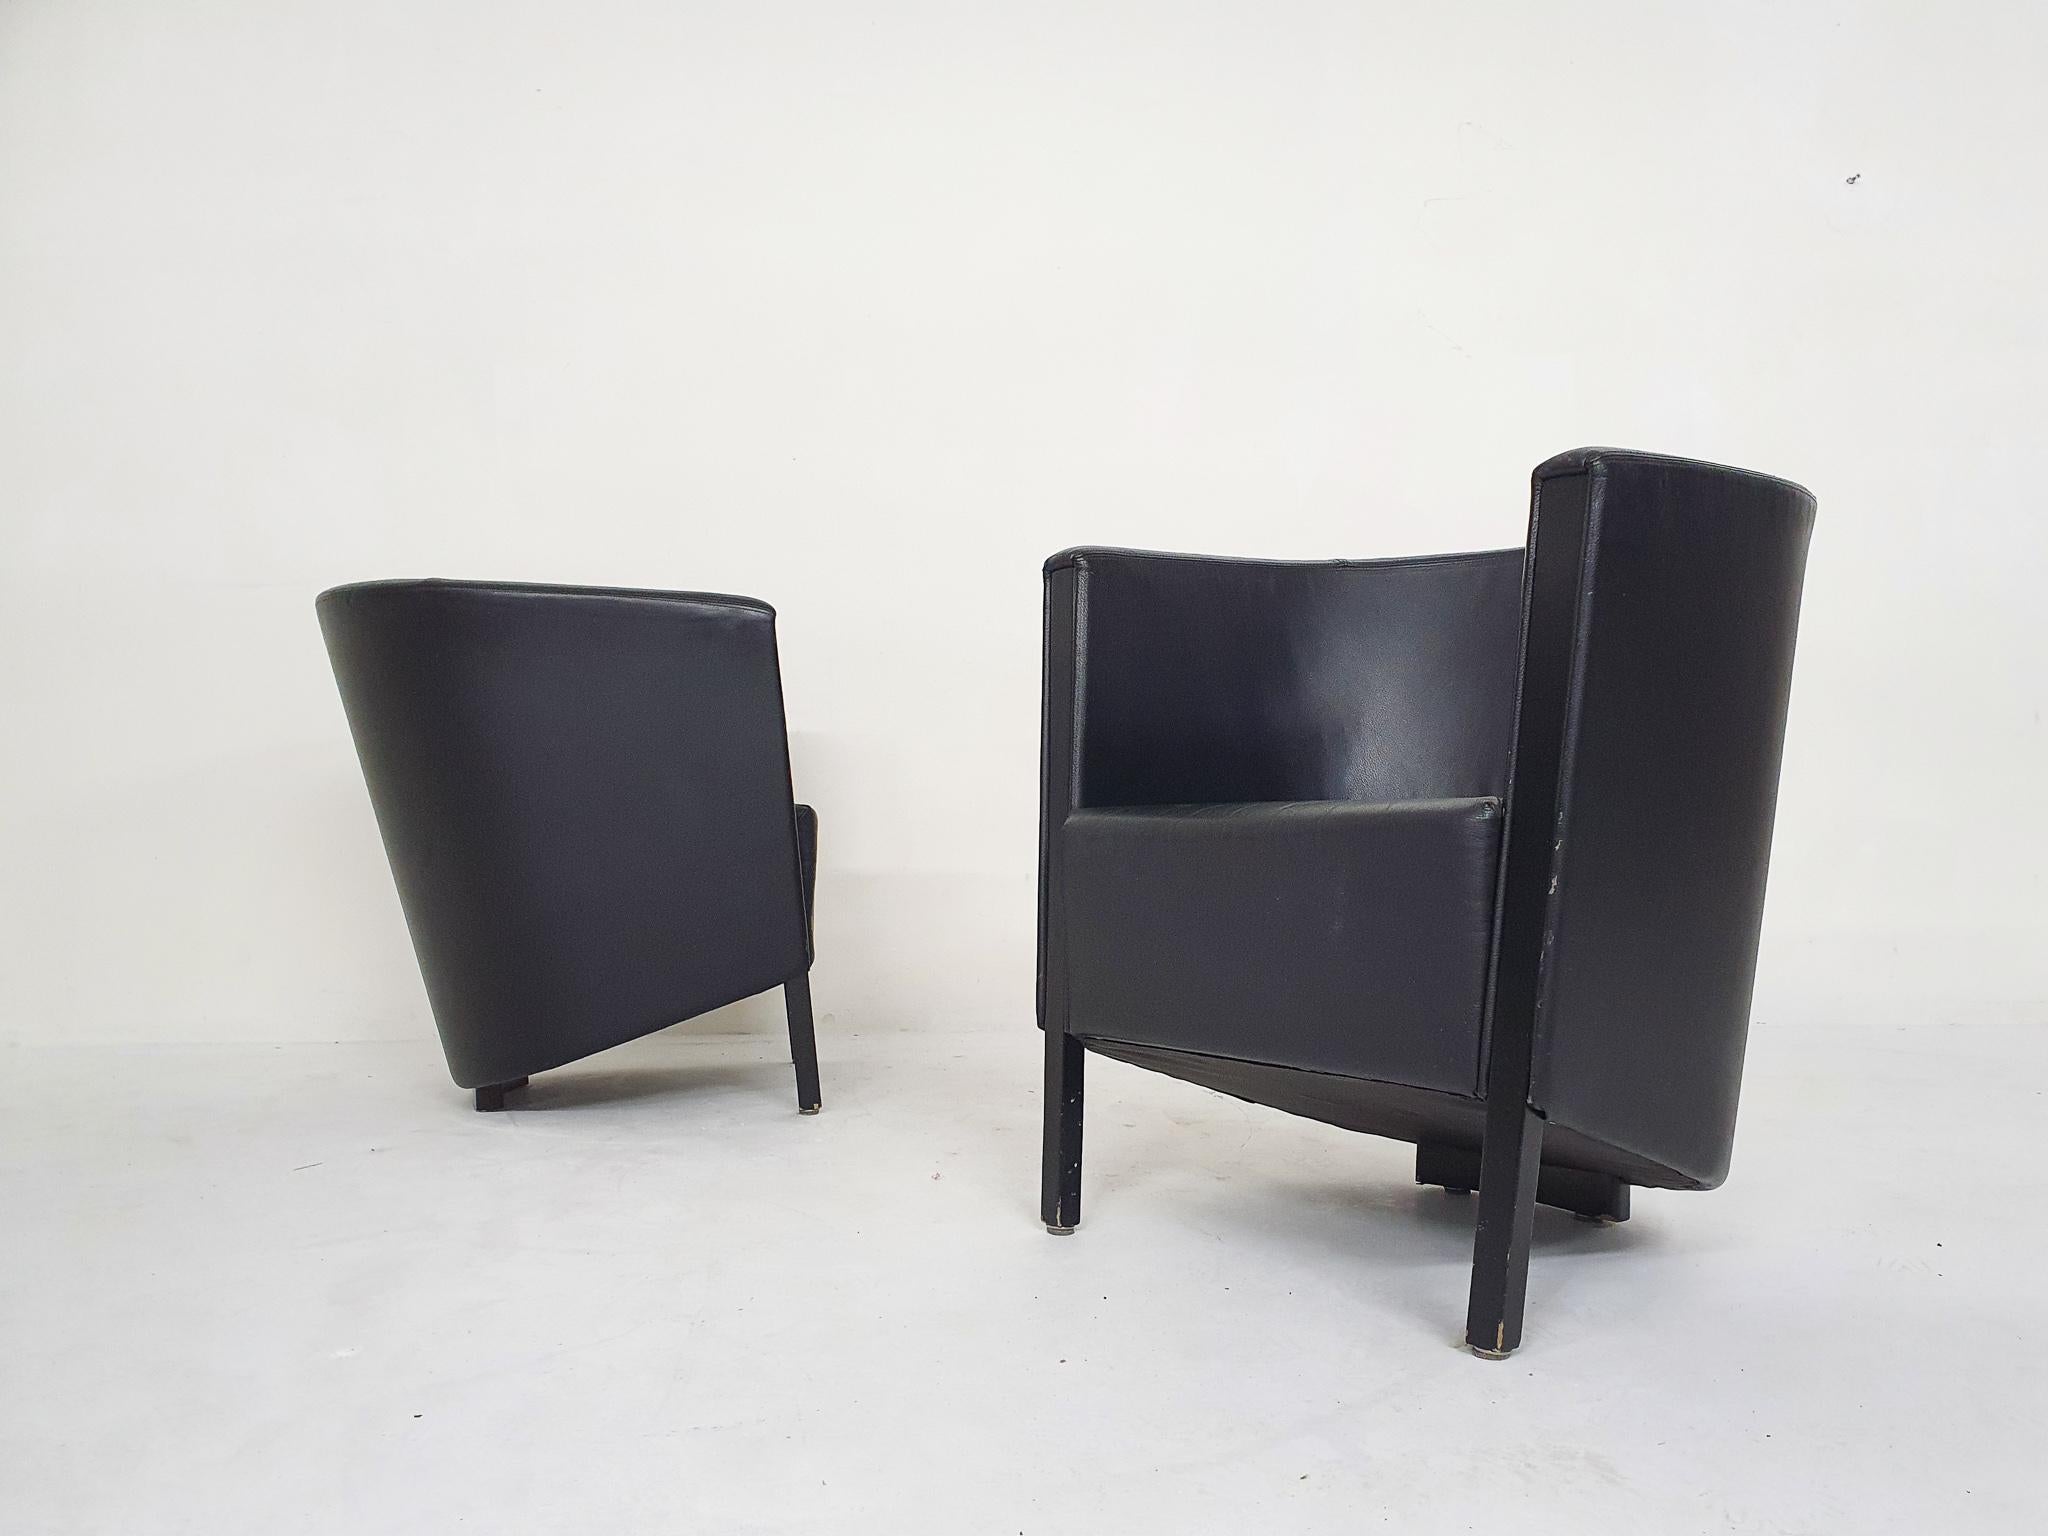 Set of two black leather lounge chairs with black wooden feet by Antonio Citterio for Moroso With normal traces of use consistent with age and use.

